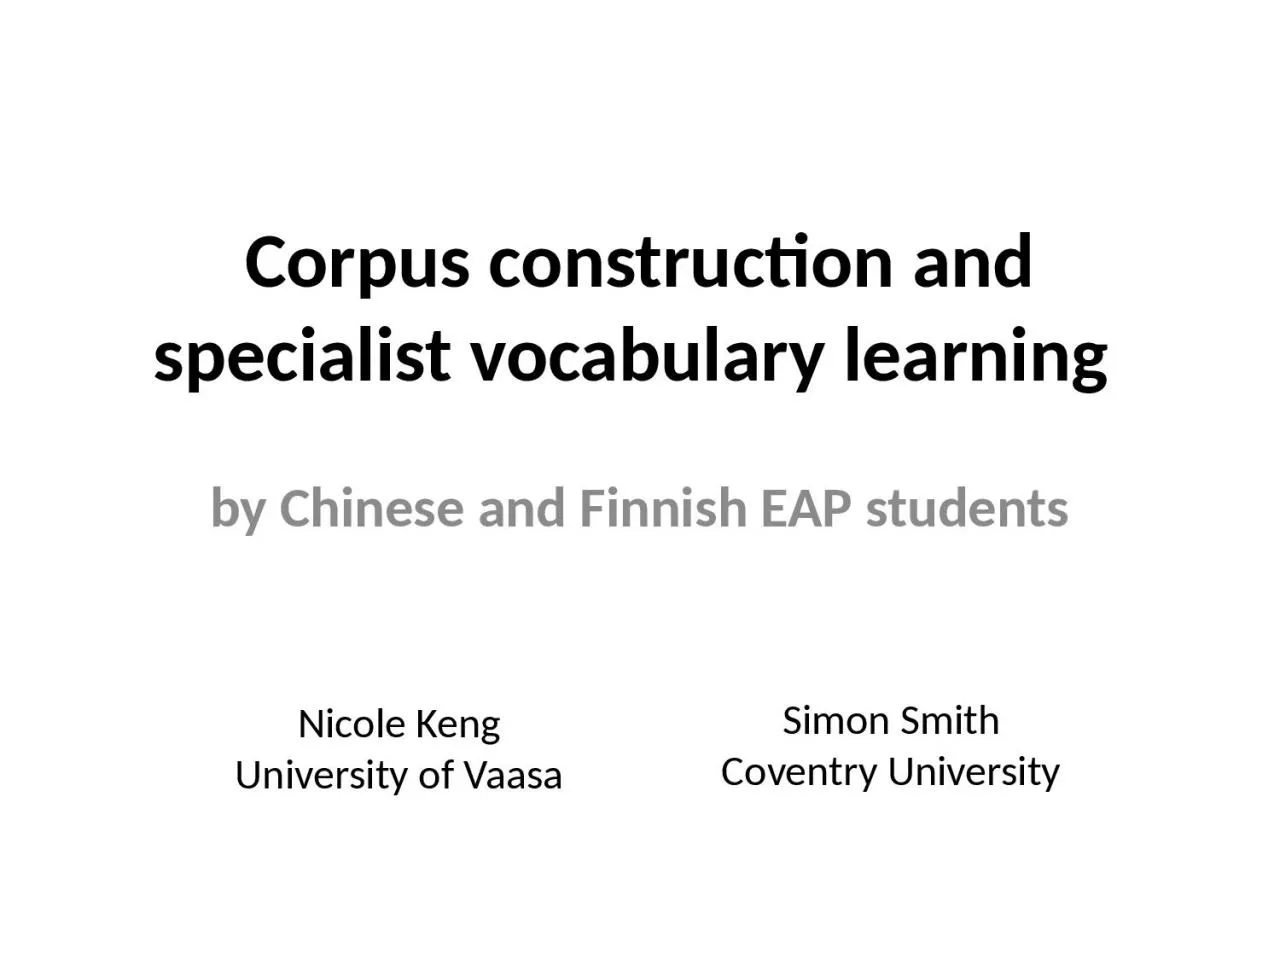 Corpus construction and specialist vocabulary learning